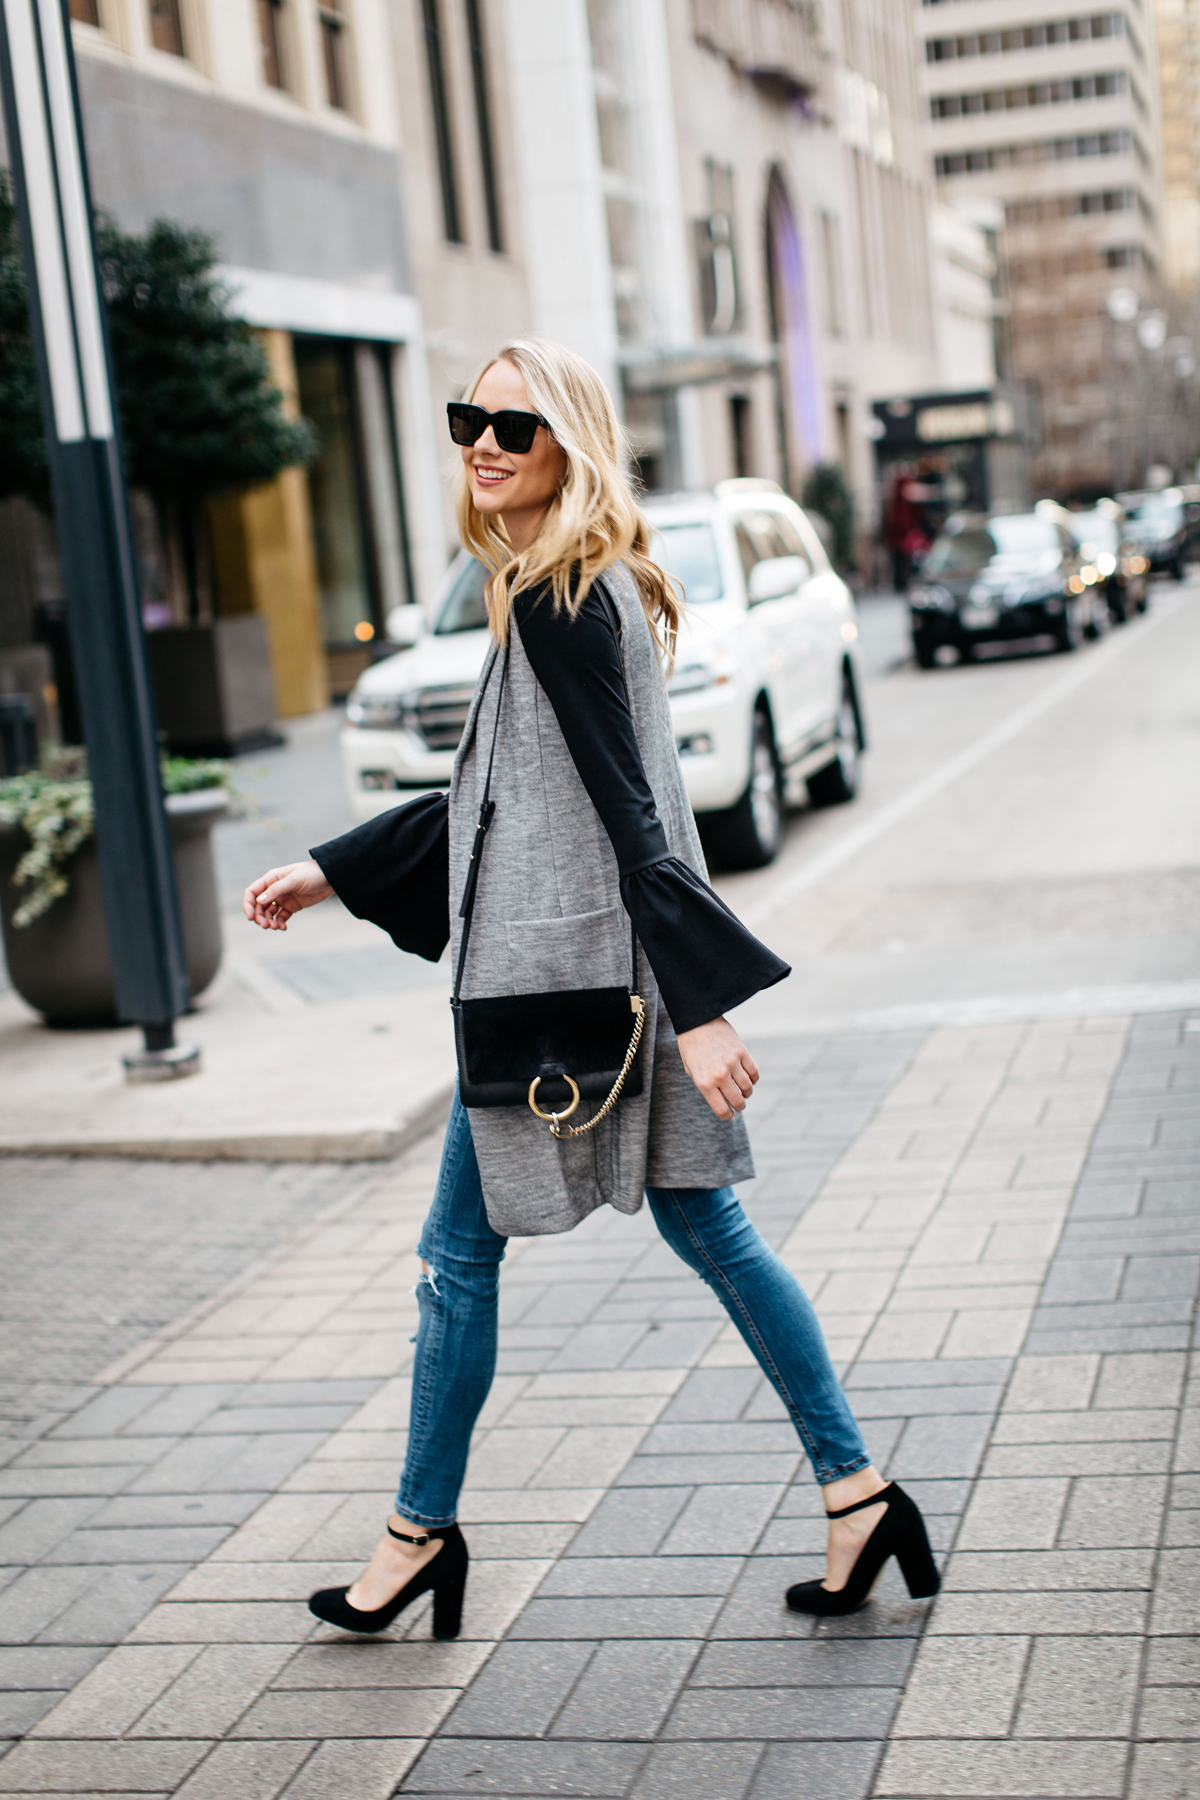 Fall Outfit, Winter Outfit, Long Grey Vest, Black Bell Sleeve Top, Chloe Faye Handbag, Denim Ripped Skinny Jeans, Black Ankle Strap Pumps